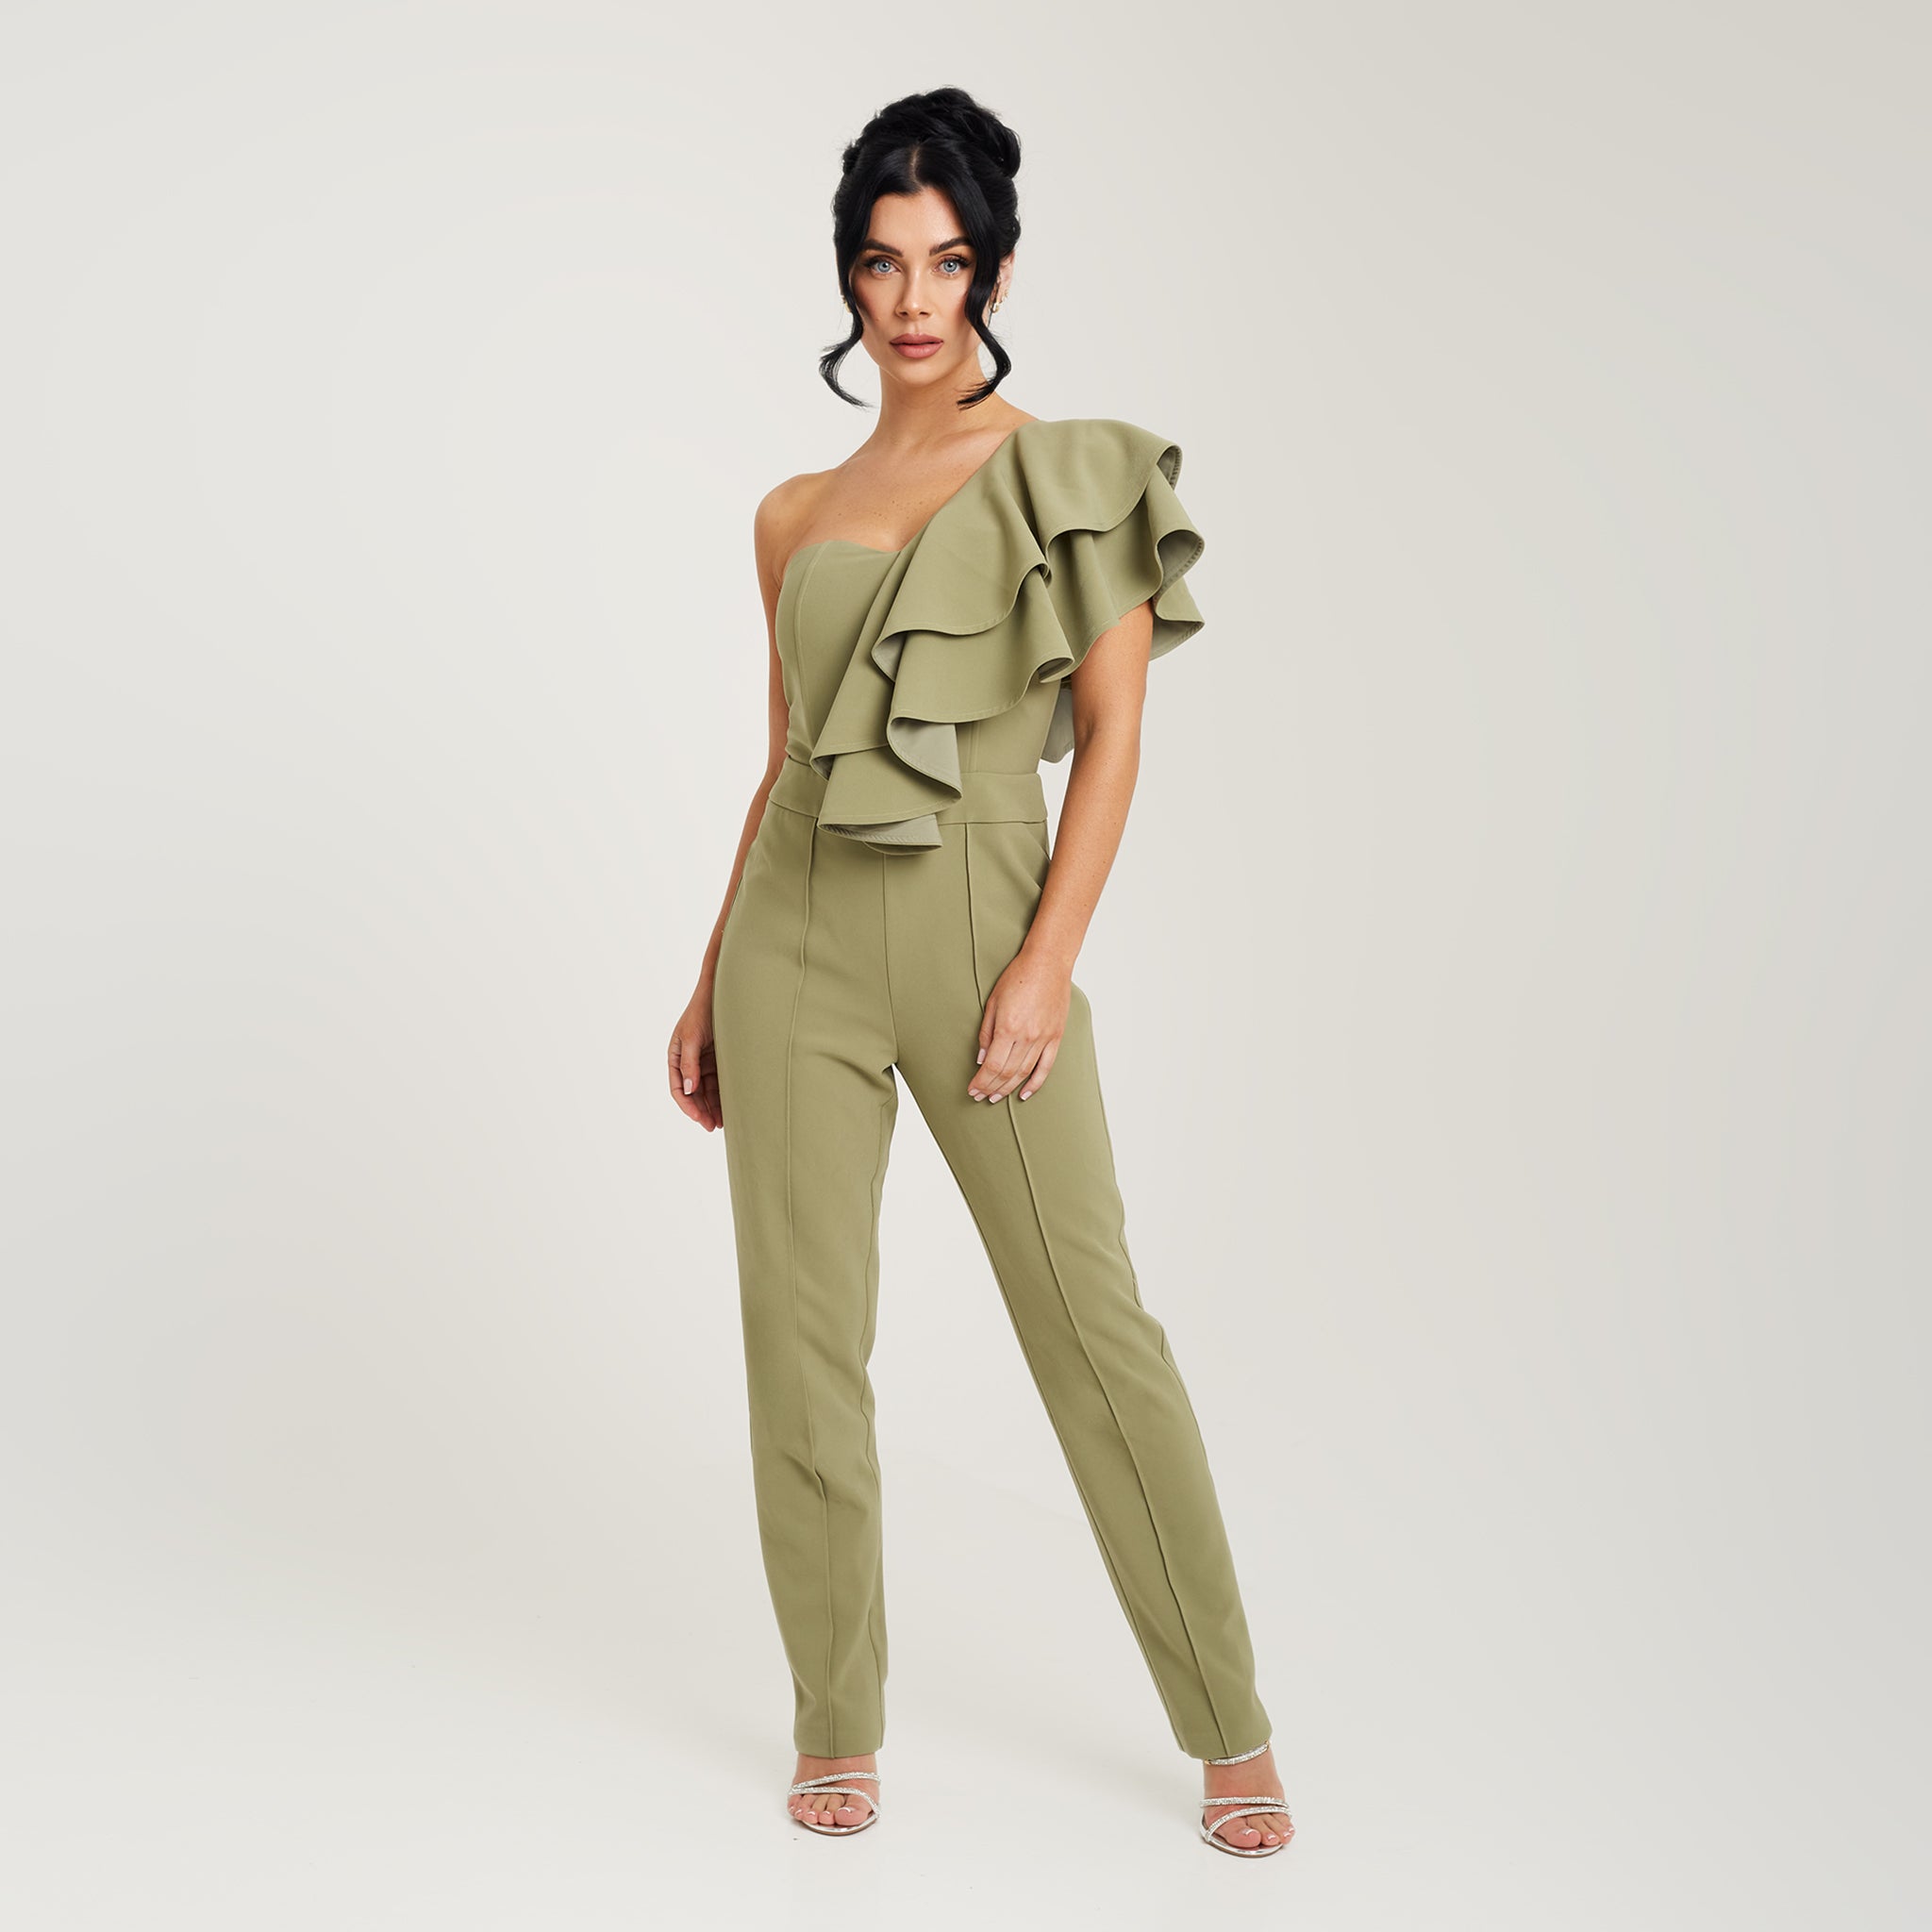 Cally Jane Beech, a woman with shoulder-length brunette hair, showcases a stylish sage green one-shoulder ruffle jumpsuit with cigarette trousers. The jumpsuit features a single shoulder strap, creating an asymmetrical neckline, while the ruffle detail cascades elegantly down the bodice, adding a feminine and playful touch. The jumpsuit's sleek cigarette trousers fit snugly and taper down to the ankles, creating a streamlined and polished look. Cally Jane Beech confidently wears the jumpsuit.